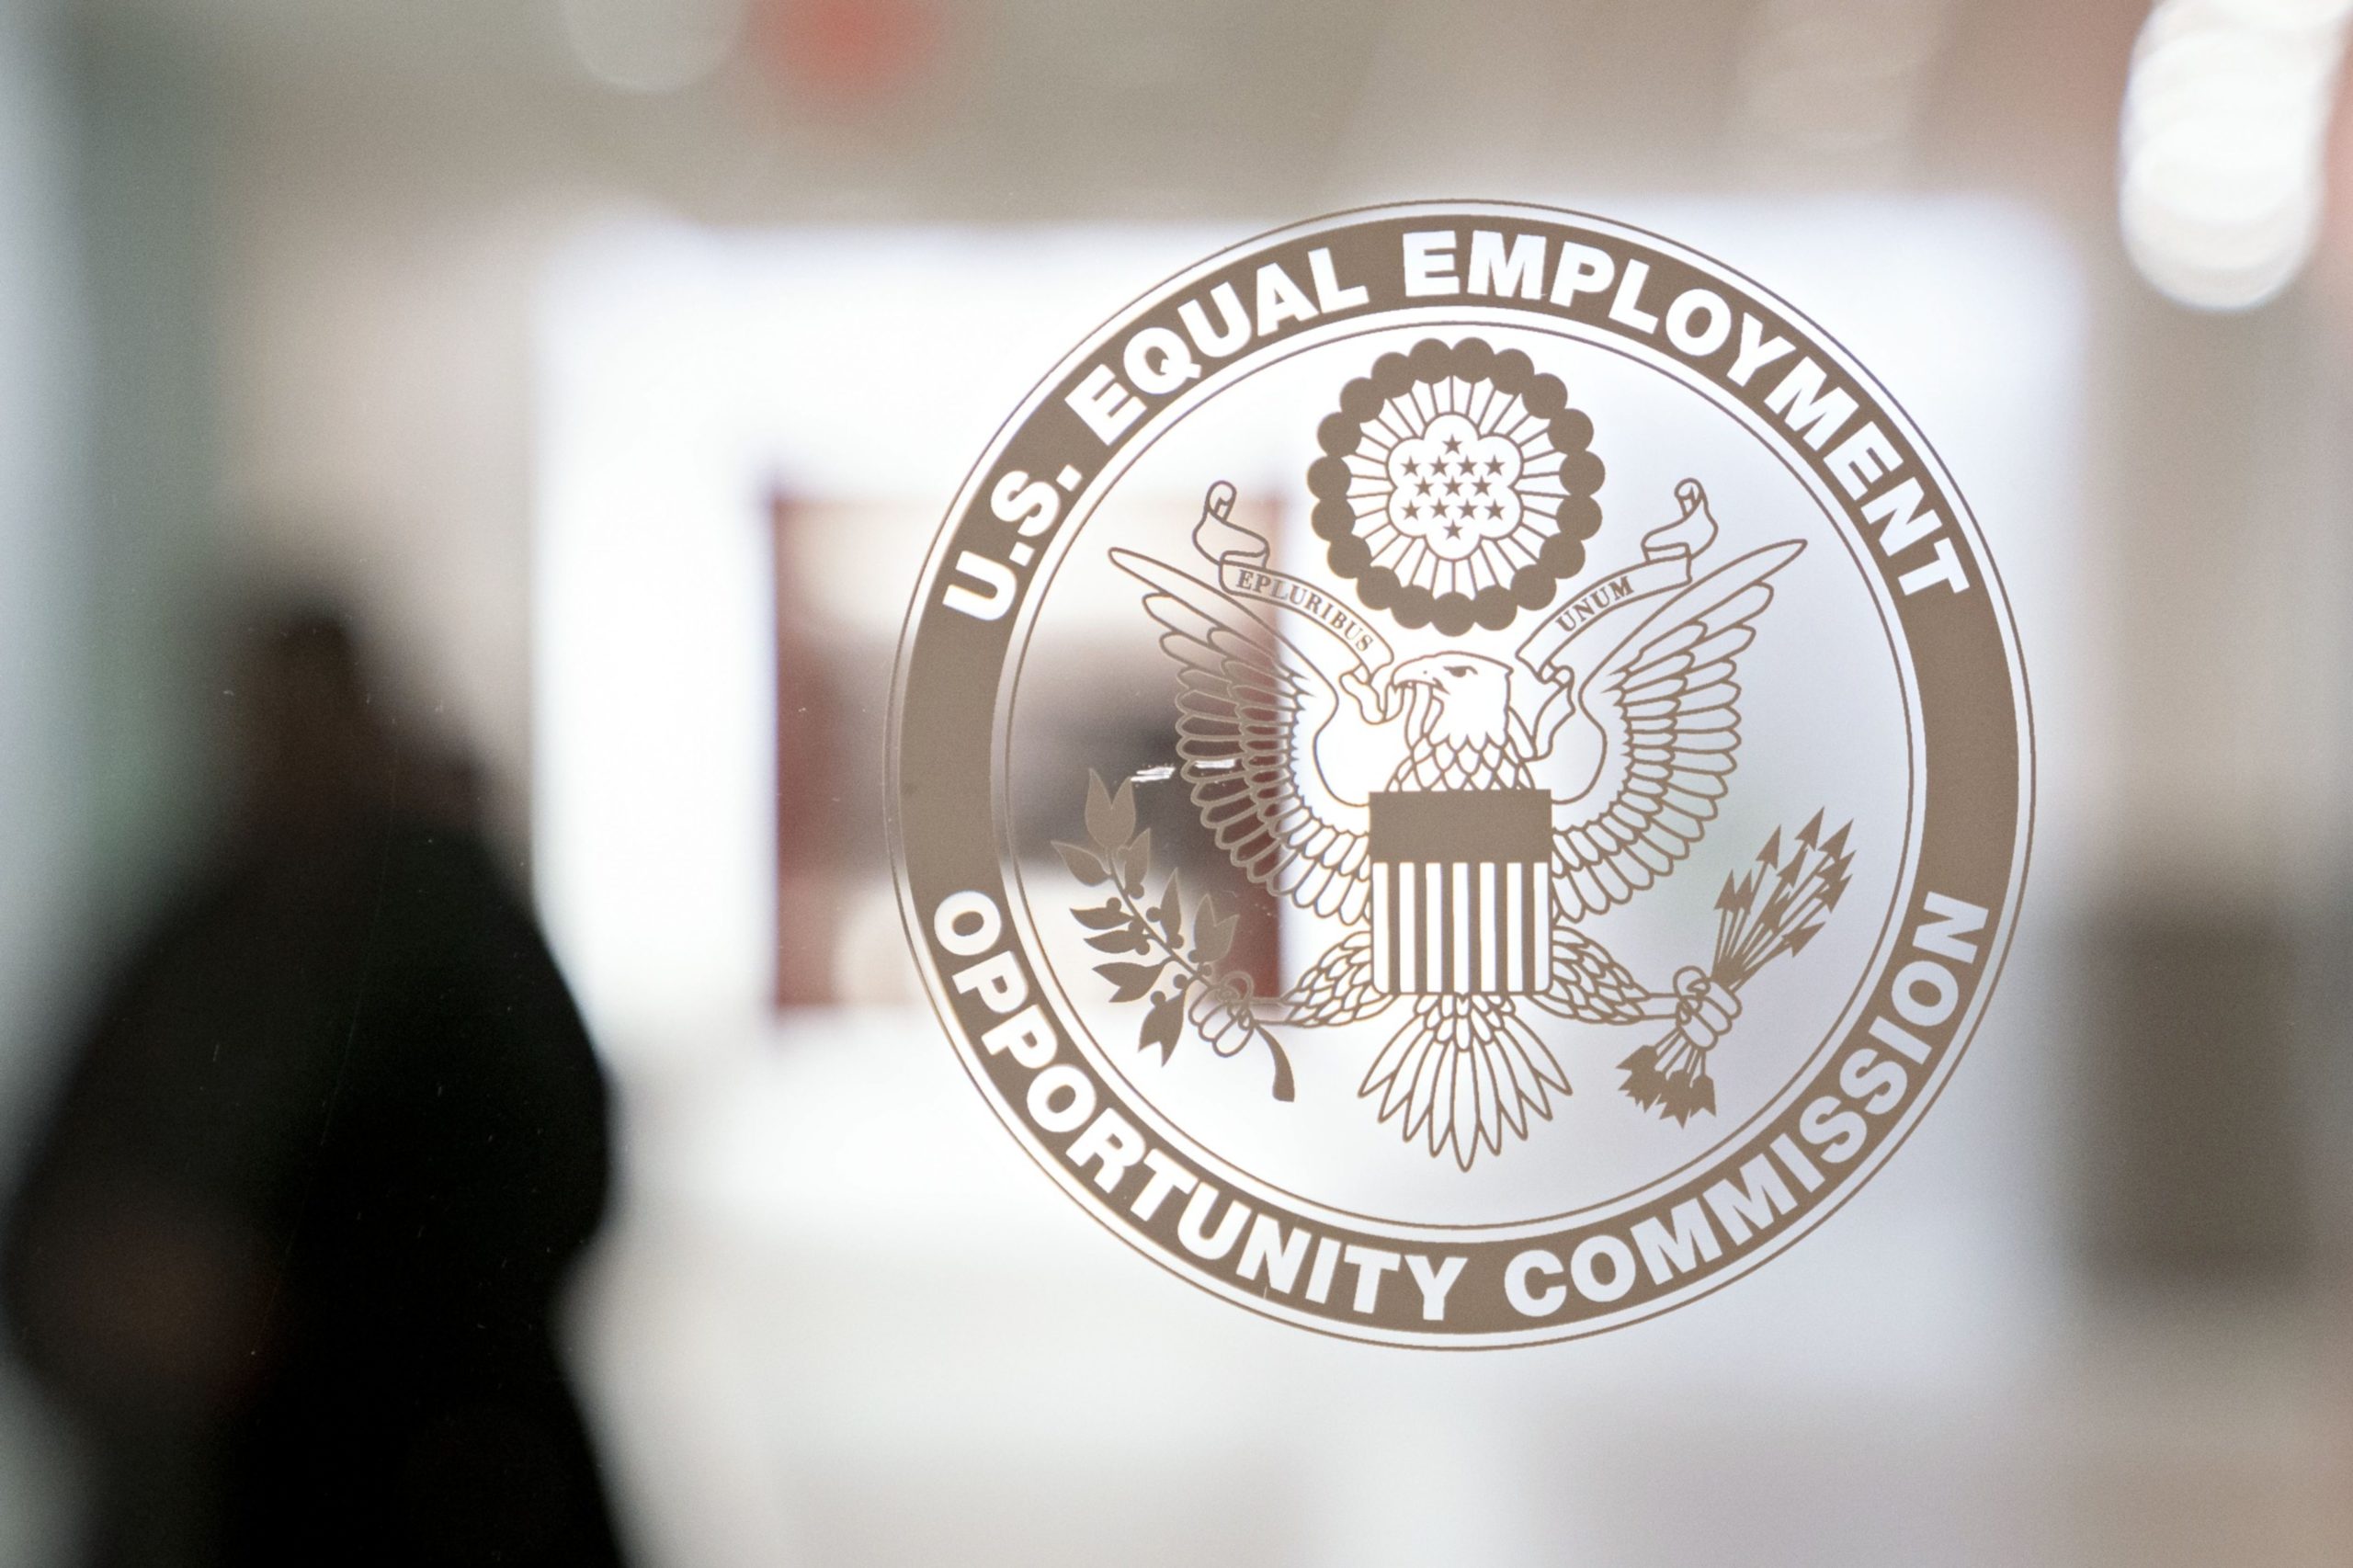 The Equal Employment Opportunity Commission (EEOC) seal is displayed on a window at the headquarters in Washington, D.C., U.S.